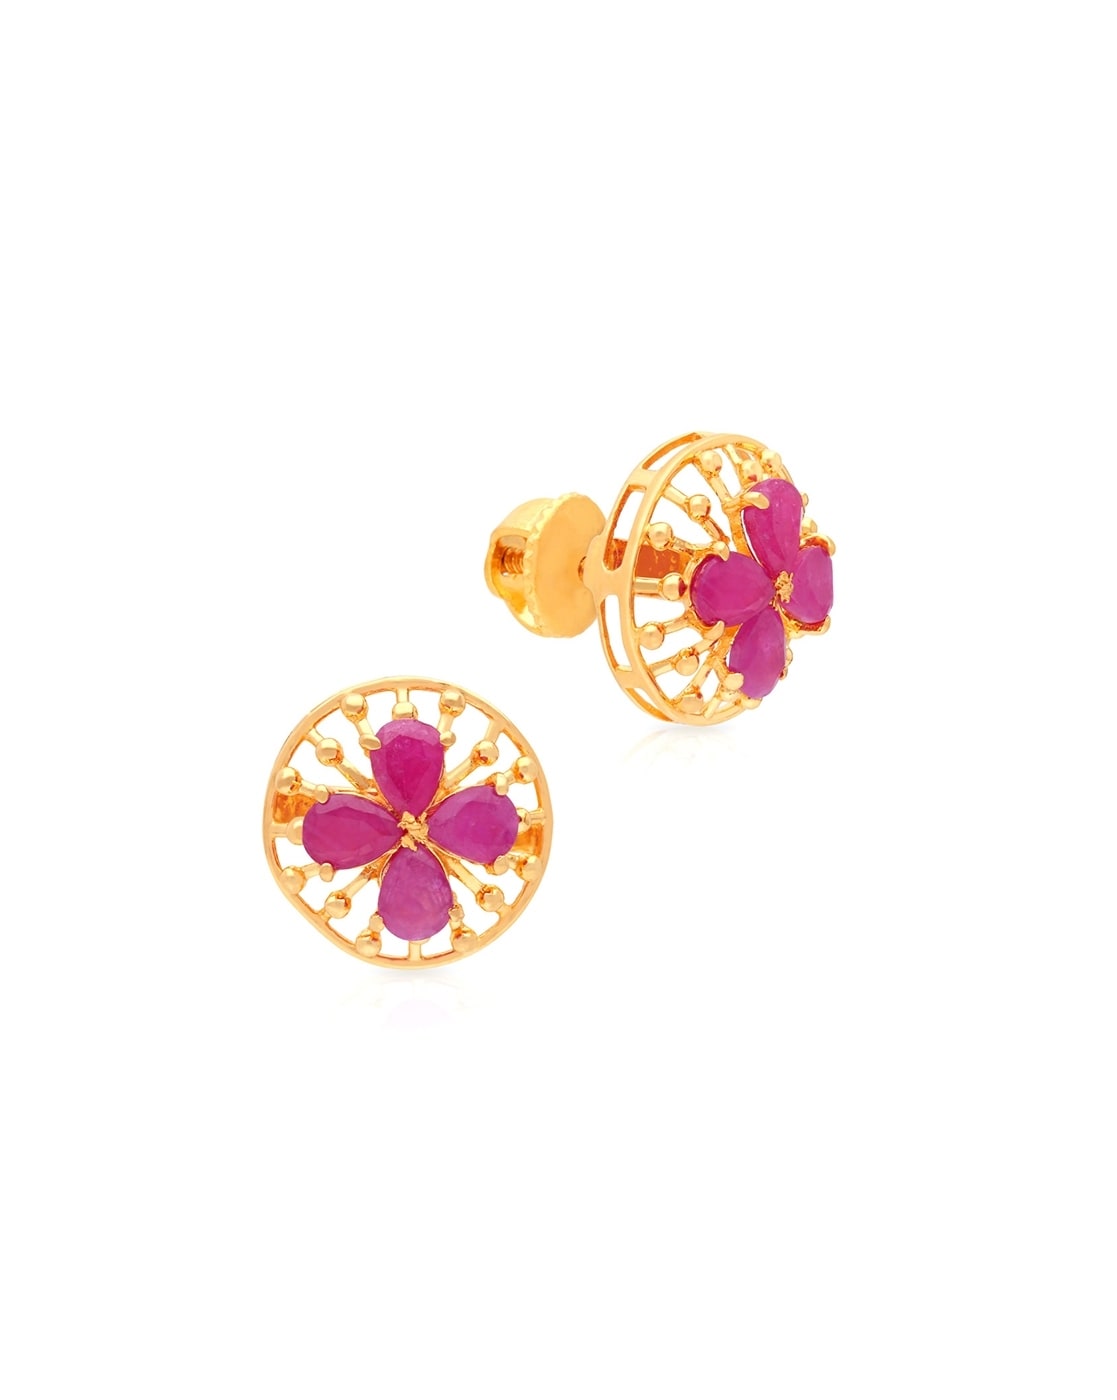 Gold Stud Earrings for Women in 22K Gold with Cz - GER6812